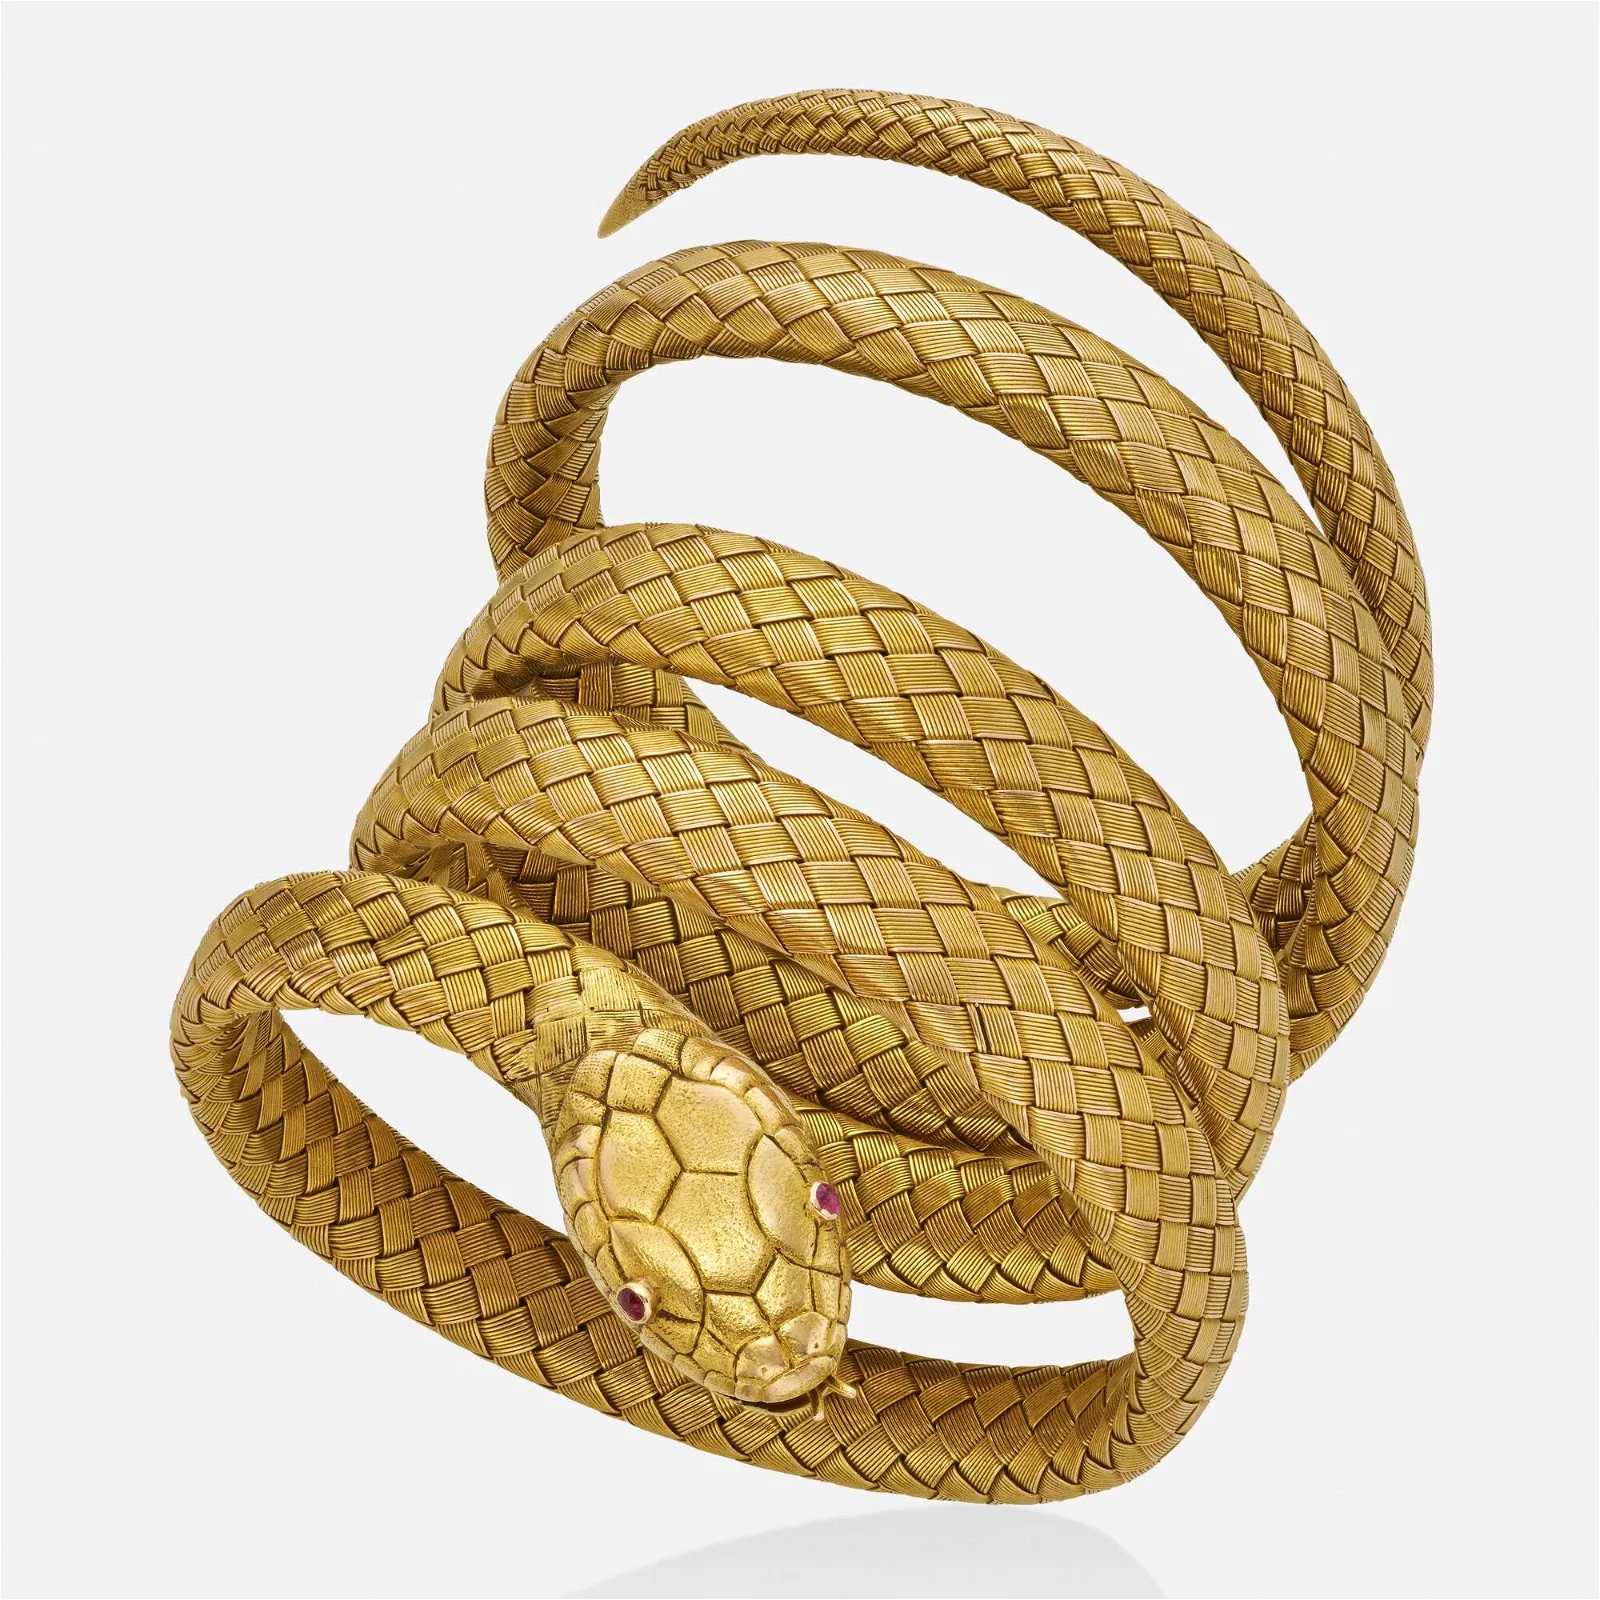 Tiffany & Co. Revivalist gold and ruby snake bracelet, which sold for $32,000 ($41,920 with buyer’s premium) at Toomey.